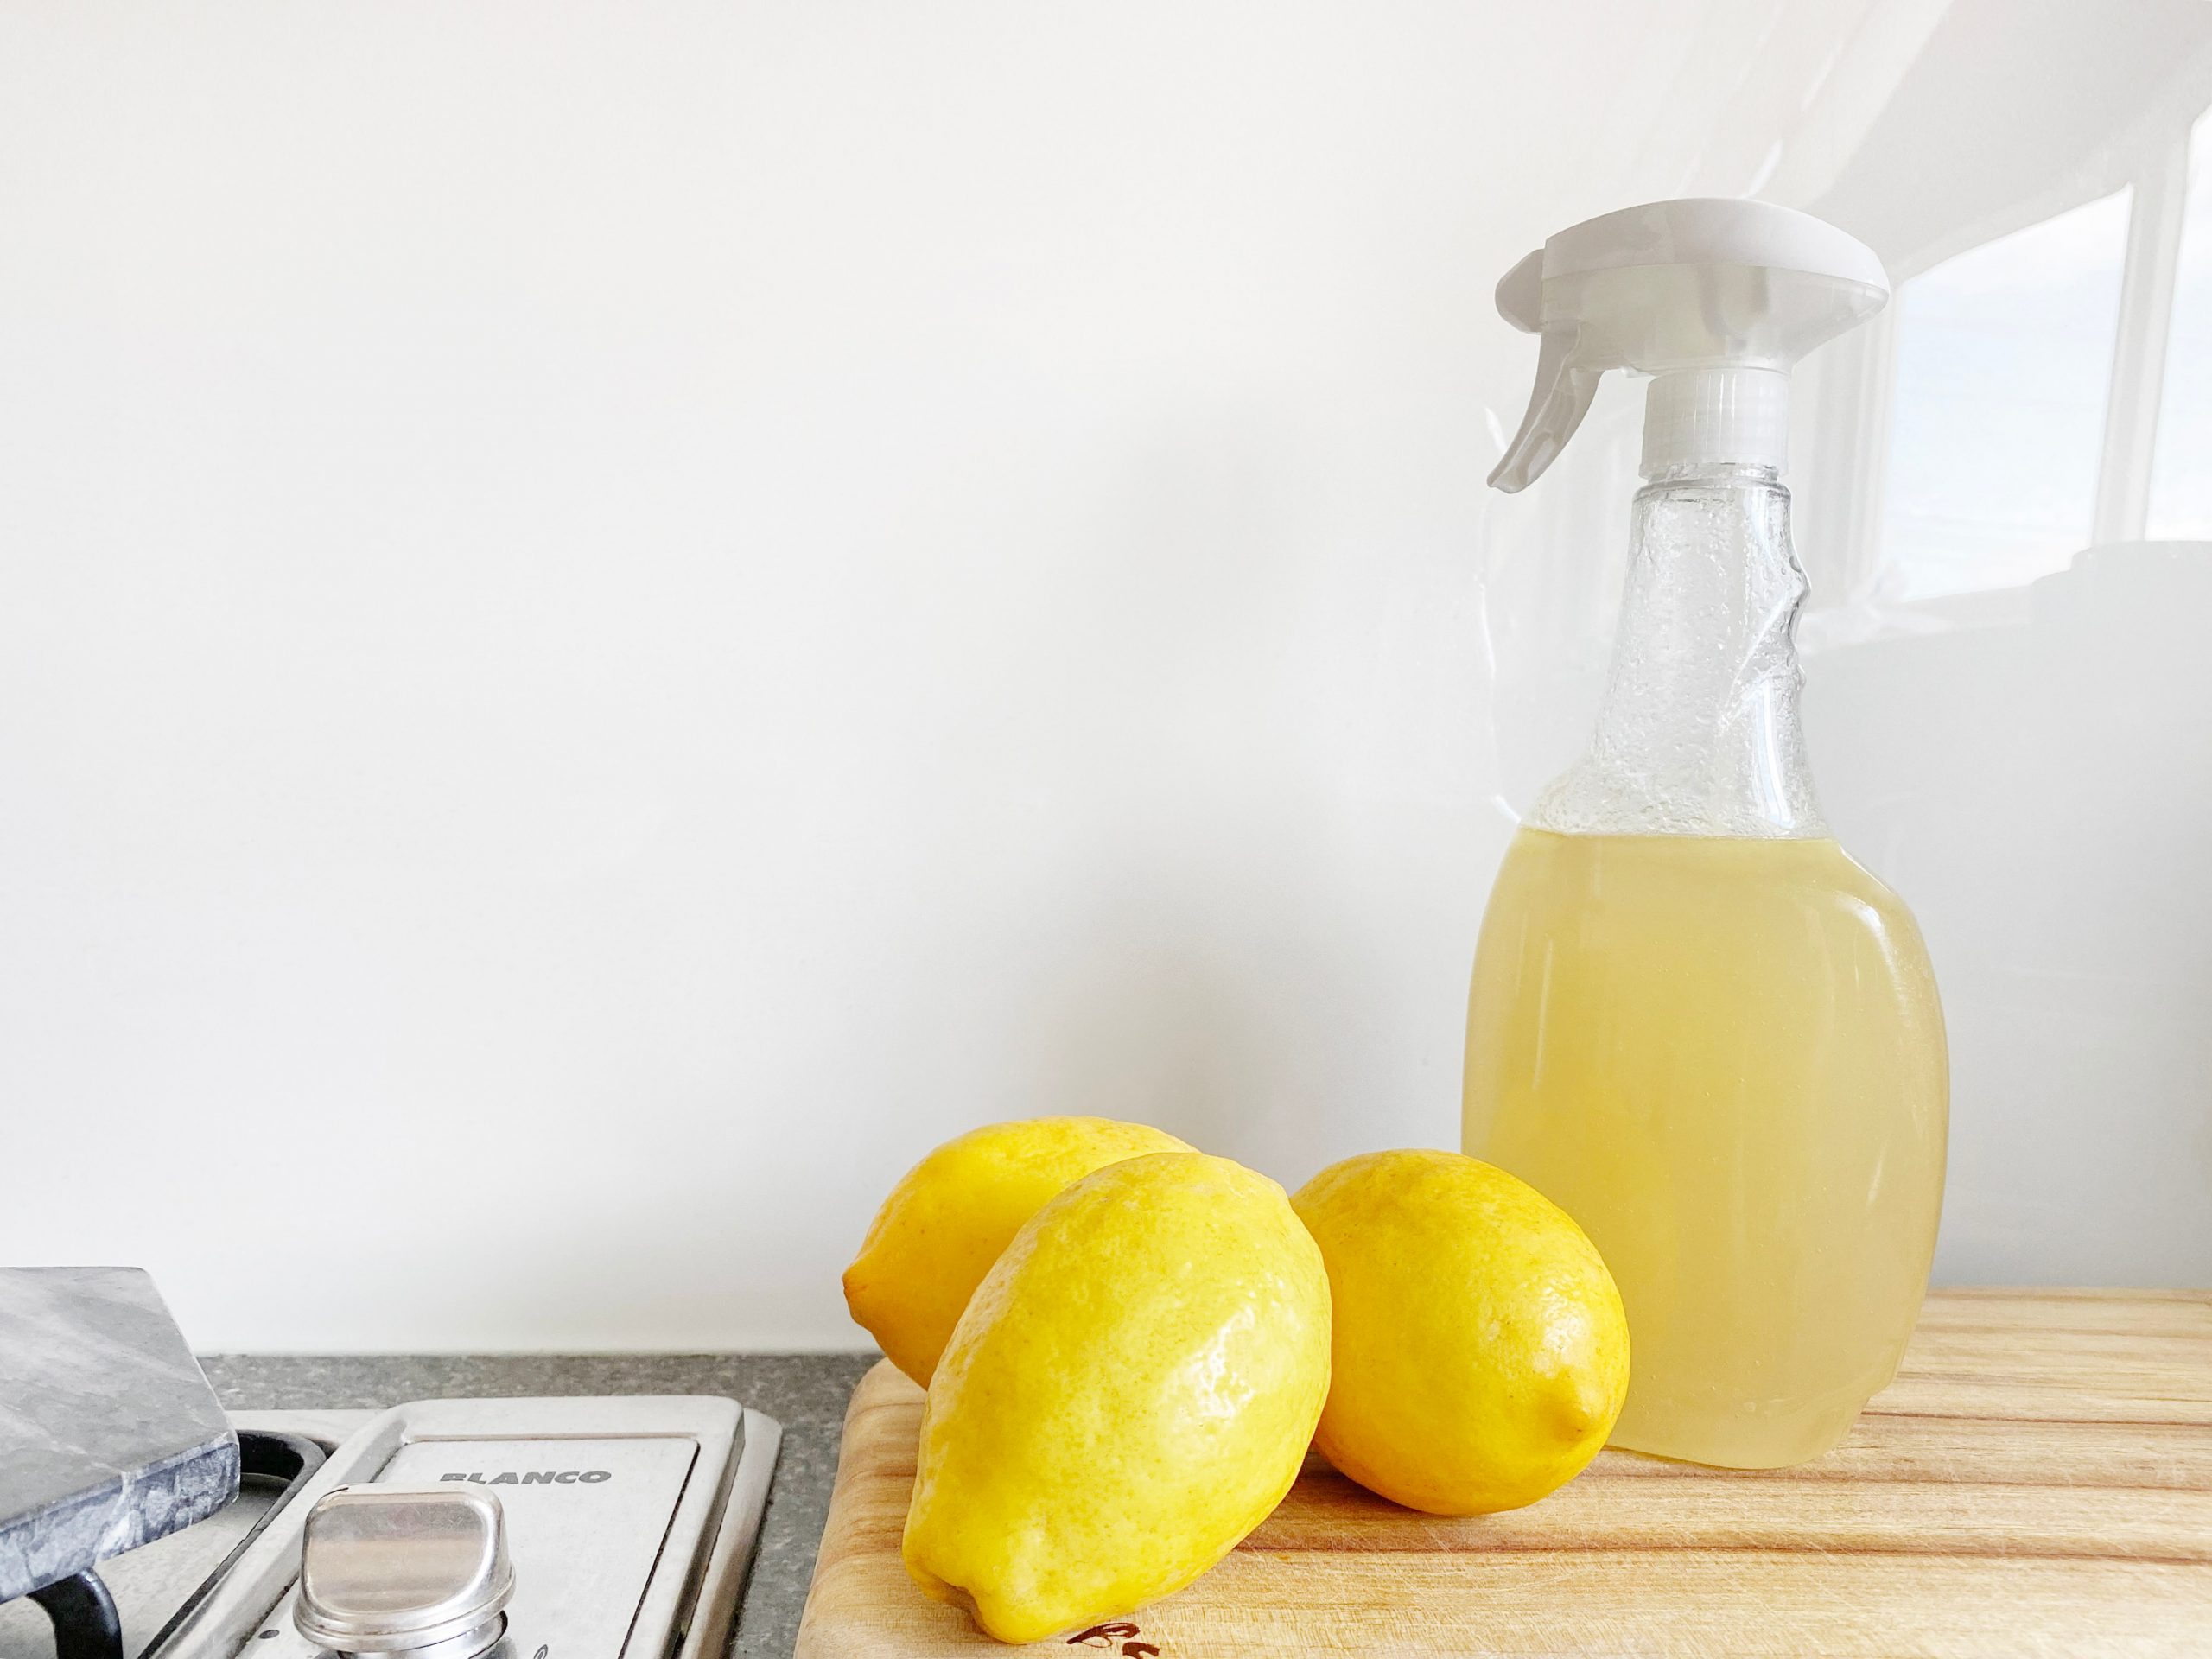 Three lemons next to a kitchen spray made with castile soap.